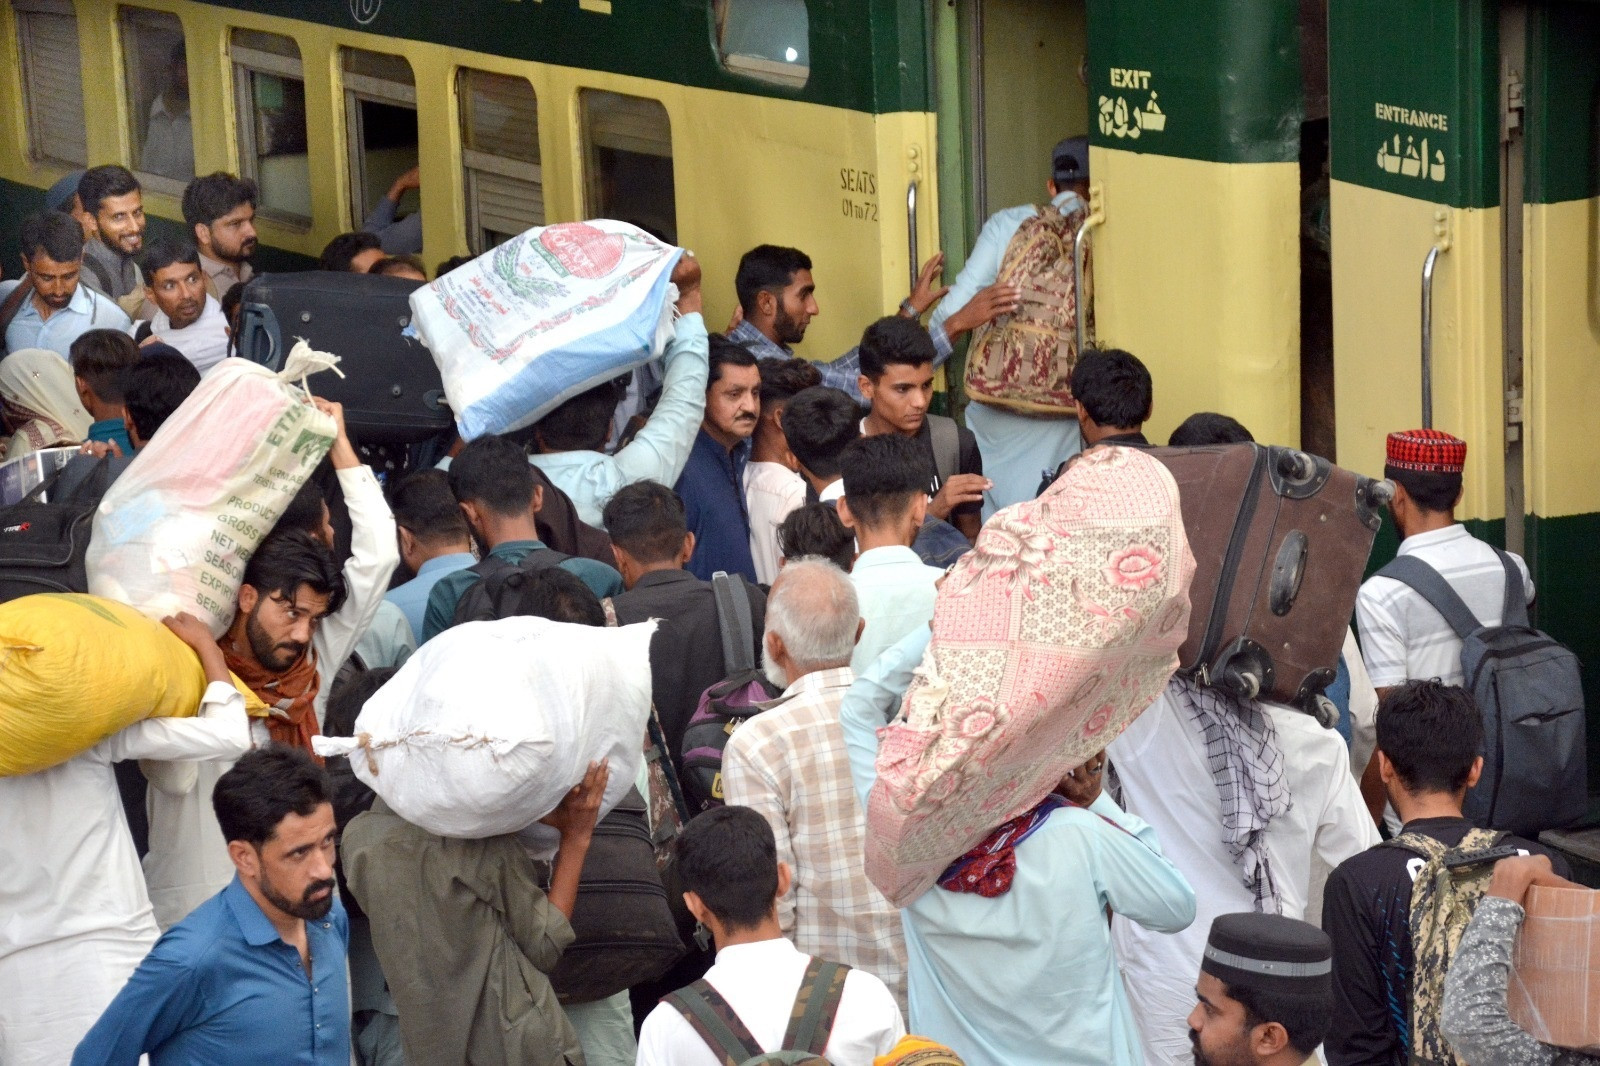 the journey back home for eidul fitr is under way as the rush to board the train reaches a fever pitch in karachi photo jalal qureshi express